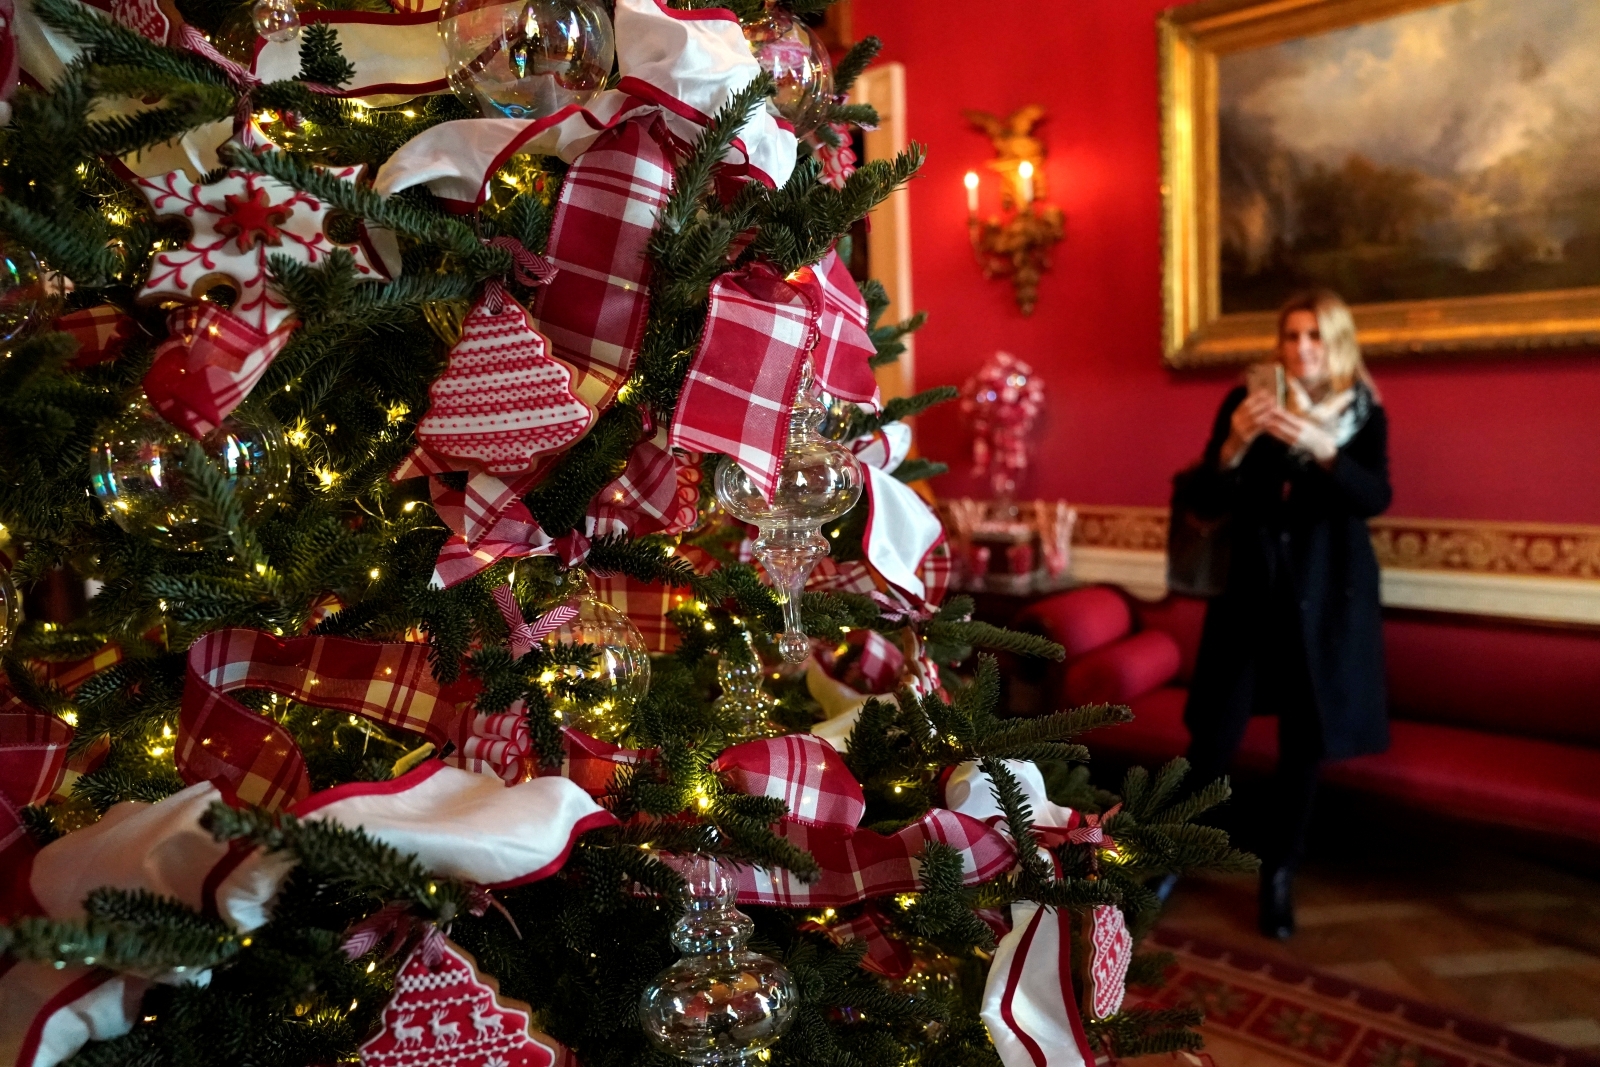 White House Christmas decorations 2017